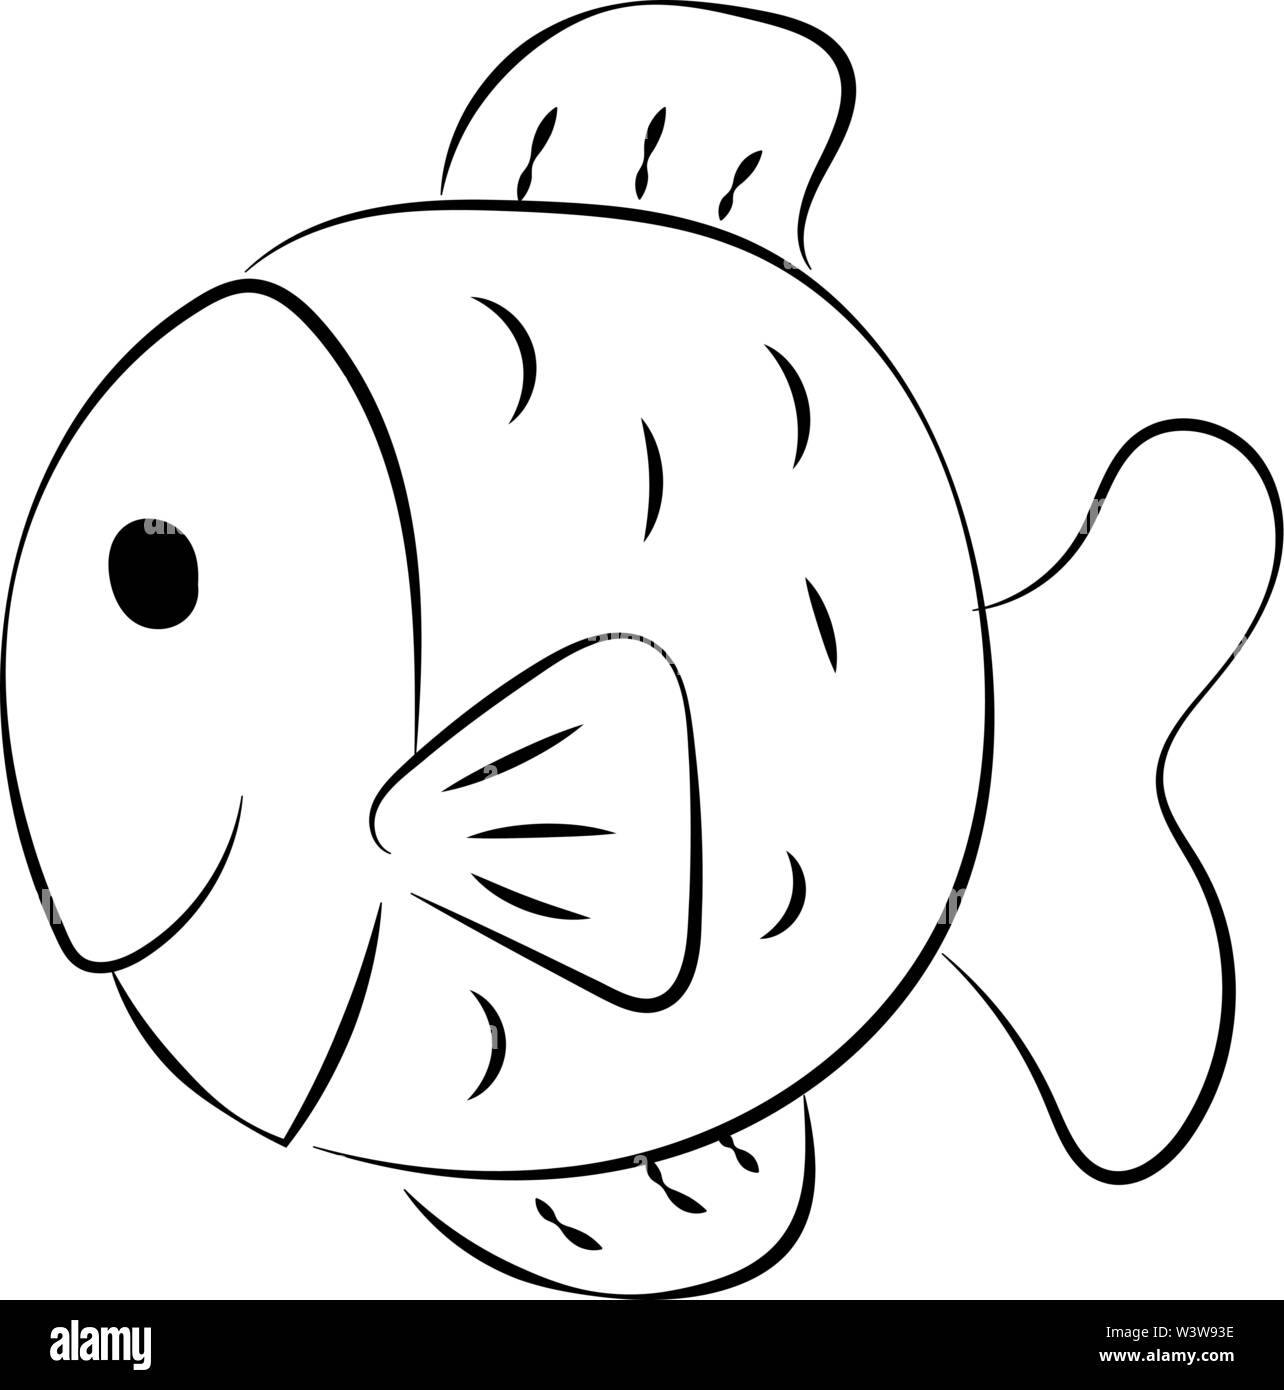 Fat fish drawing, illustration, vector on white background Stock ...